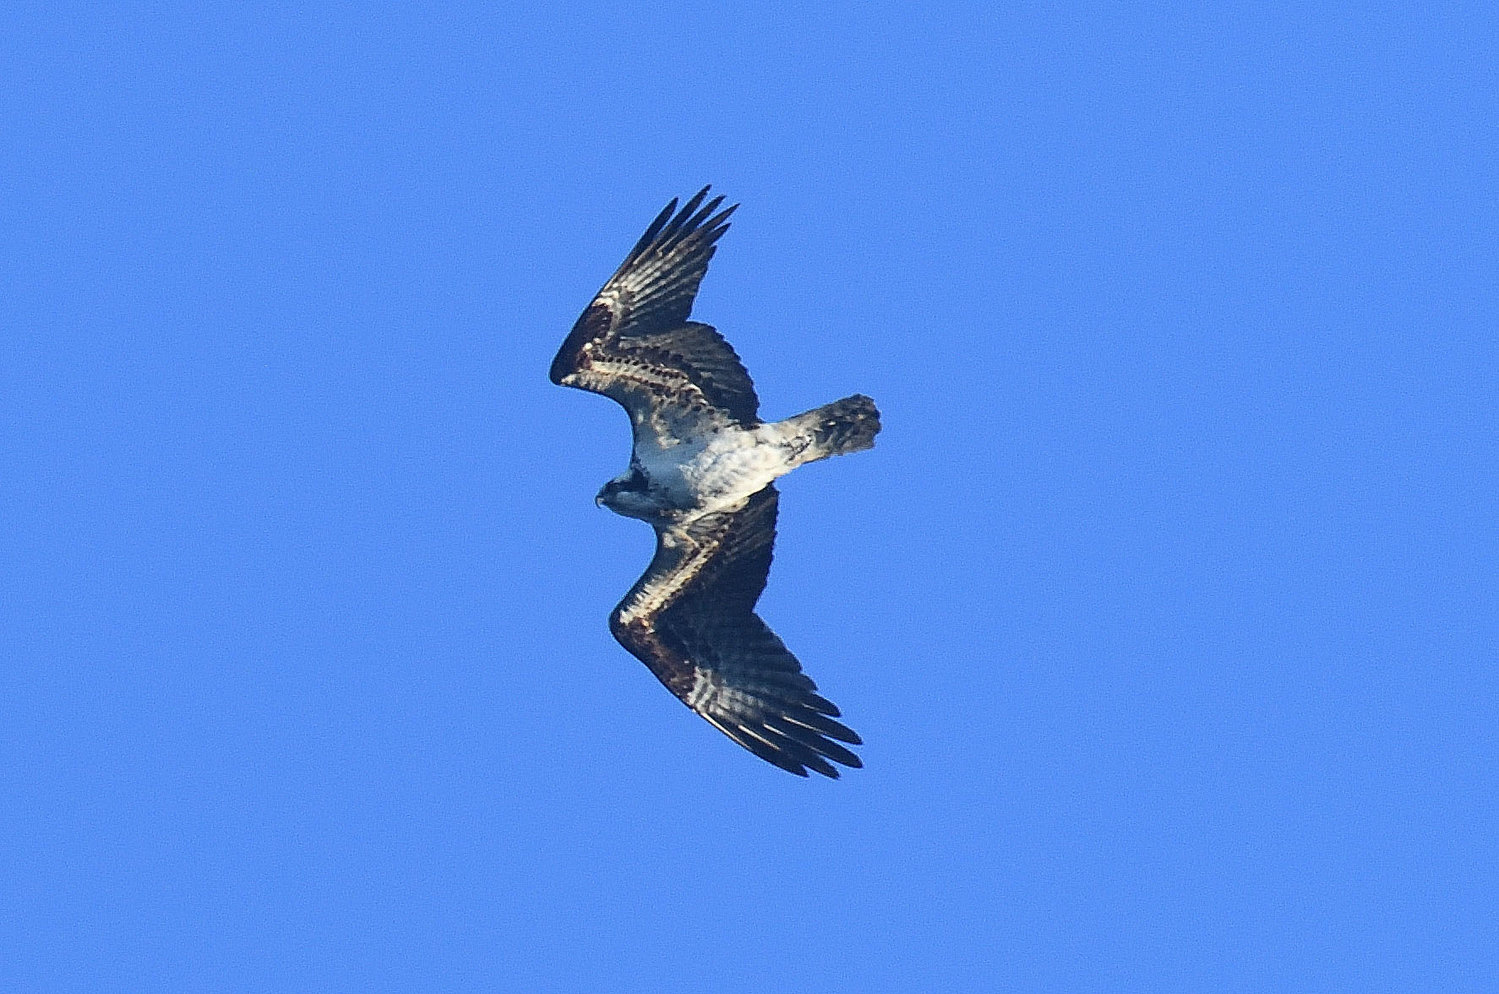 Ospreys can be seen migrating through October, but the peak month is September. They are not quite as large as eagles, and are sometimes mistaken for eagles, especially if the light is not favorable. An osprey has a more “crooked” wing than an eagle does, and has a white breast, with some faint barring evident on the flight feathers of the wing and the tail. The bill is short and hook-shaped. Ospreys might winter in Florida, or could fly as far as northern South America...